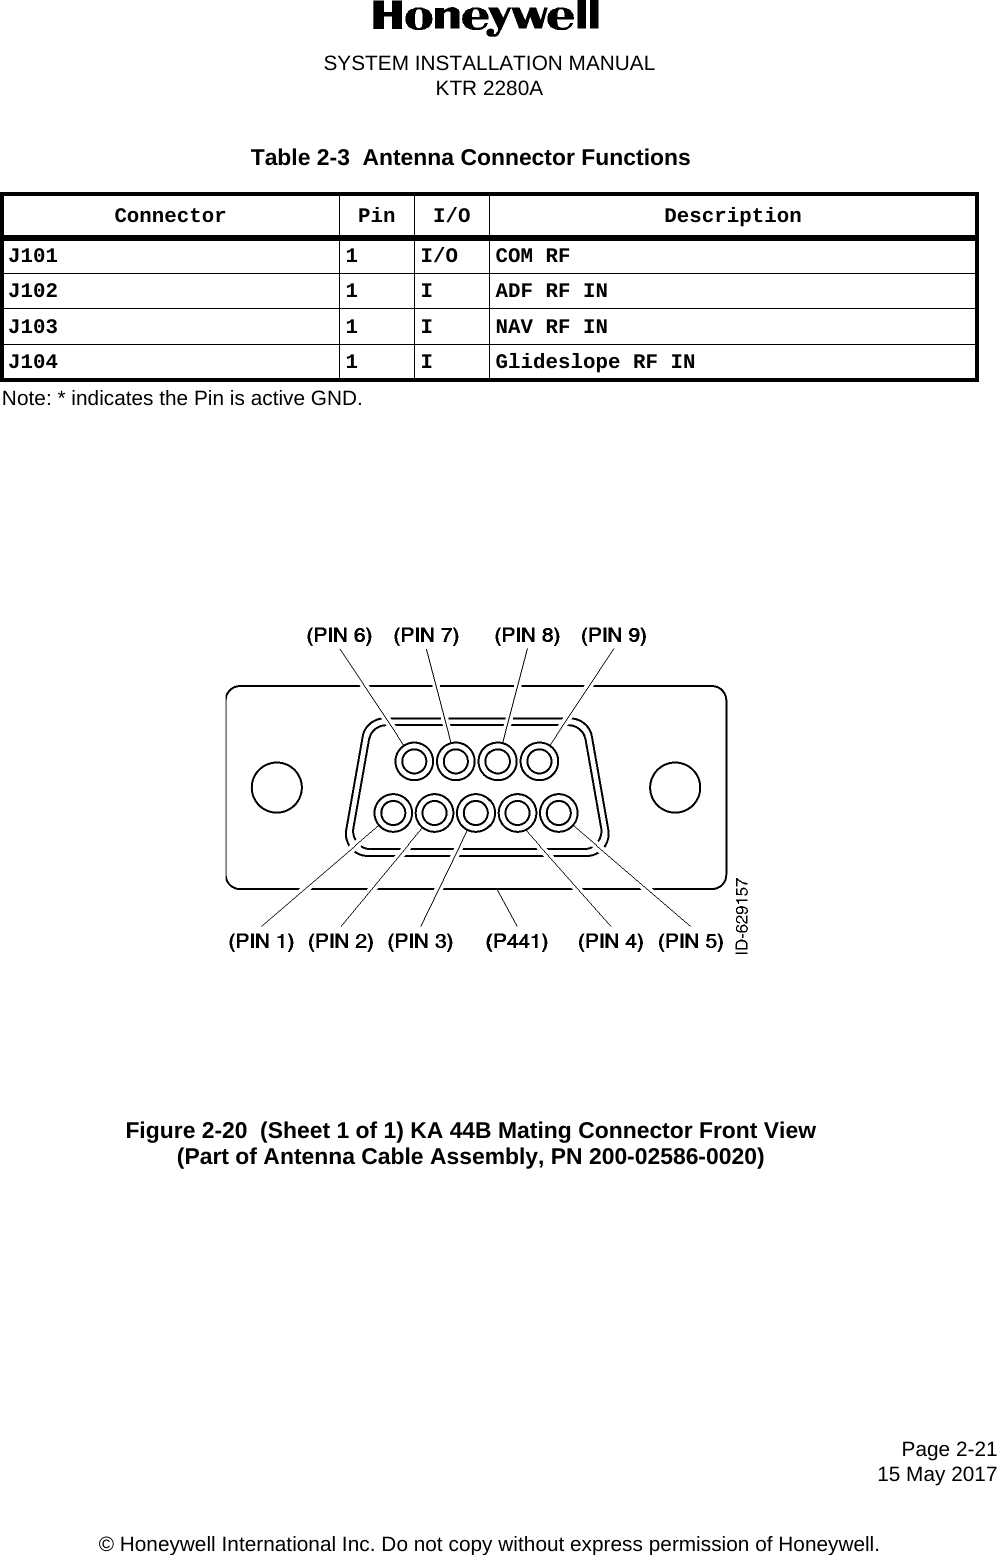 SYSTEM INSTALLATION MANUALKTR 2280APage 2-21 15 May 2017© Honeywell International Inc. Do not copy without express permission of Honeywell.Table 2-3  Antenna Connector FunctionsFigure 2-20  (Sheet 1 of 1) KA 44B Mating Connector Front View (Part of Antenna Cable Assembly, PN 200-02586-0020)Connector Pin I/O DescriptionJ101 1 I/O COM RF J102 1 I ADF RF IN J103 1 I NAV RF IN J104 1 I Glideslope RF IN Note: * indicates the Pin is active GND.